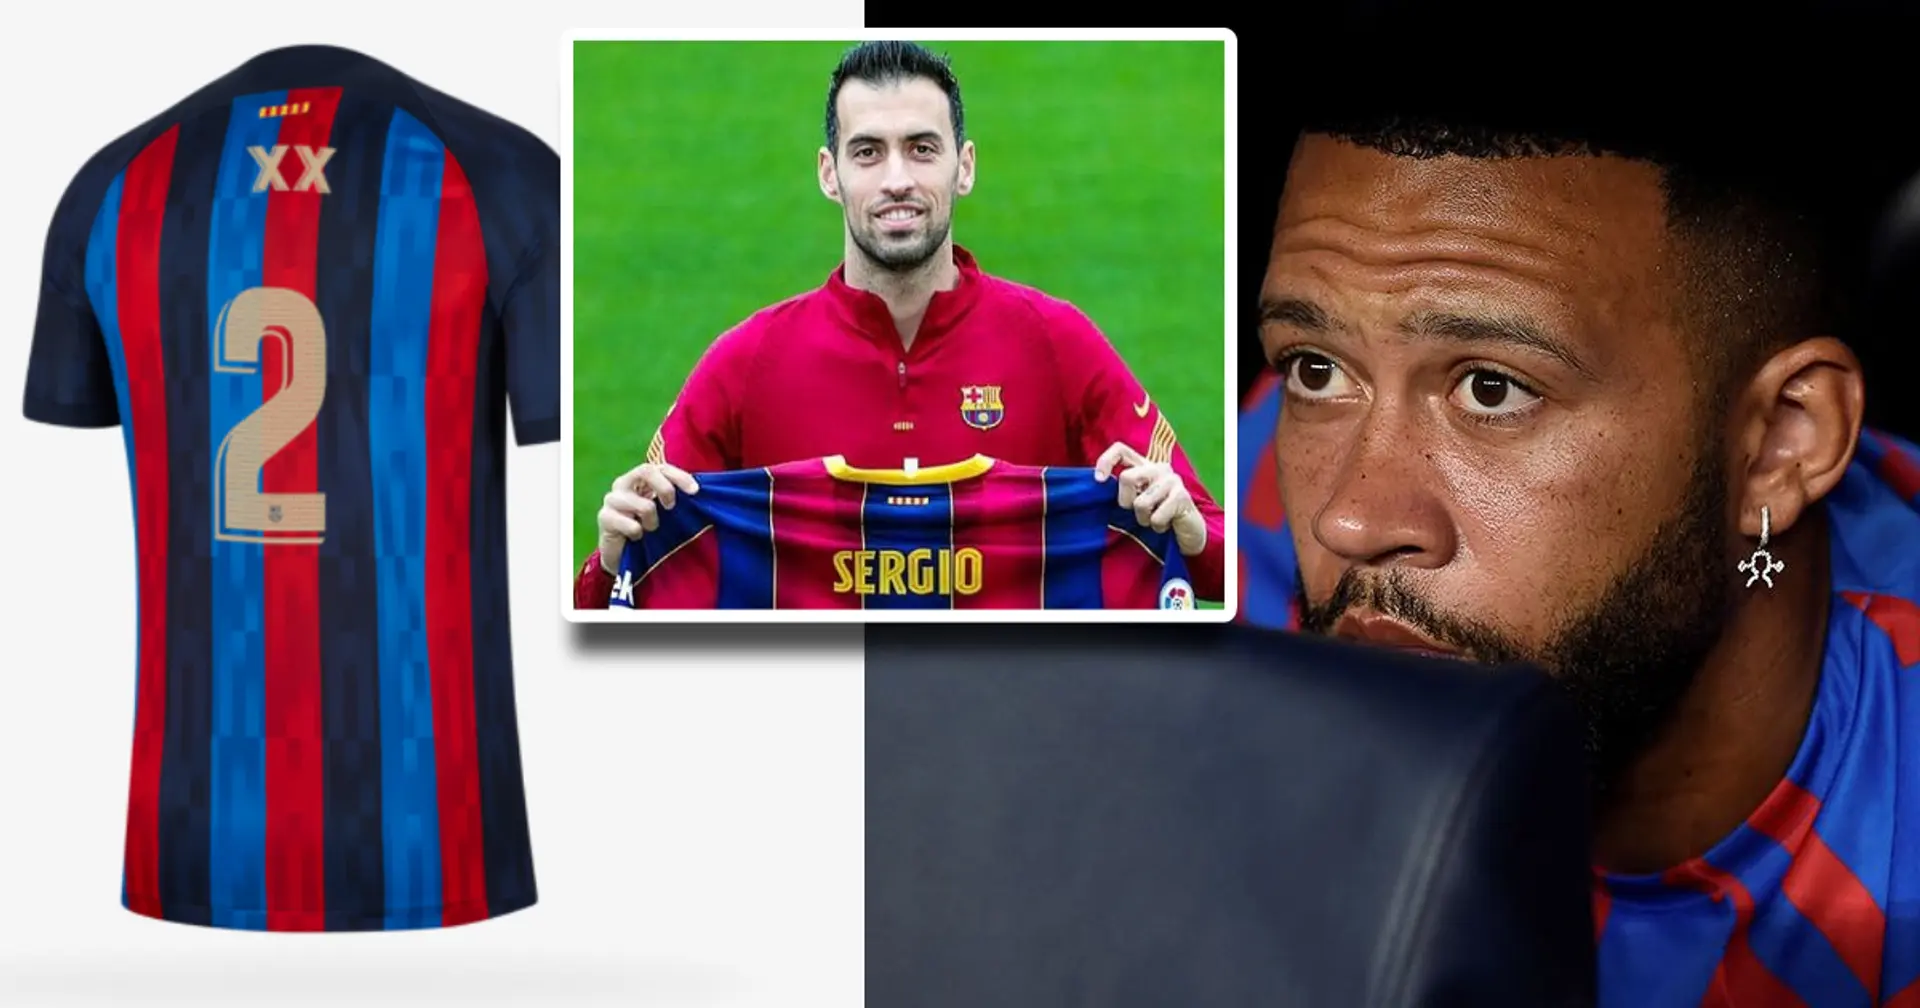 6 shirt numbers that can be vacated within 6 months - in images